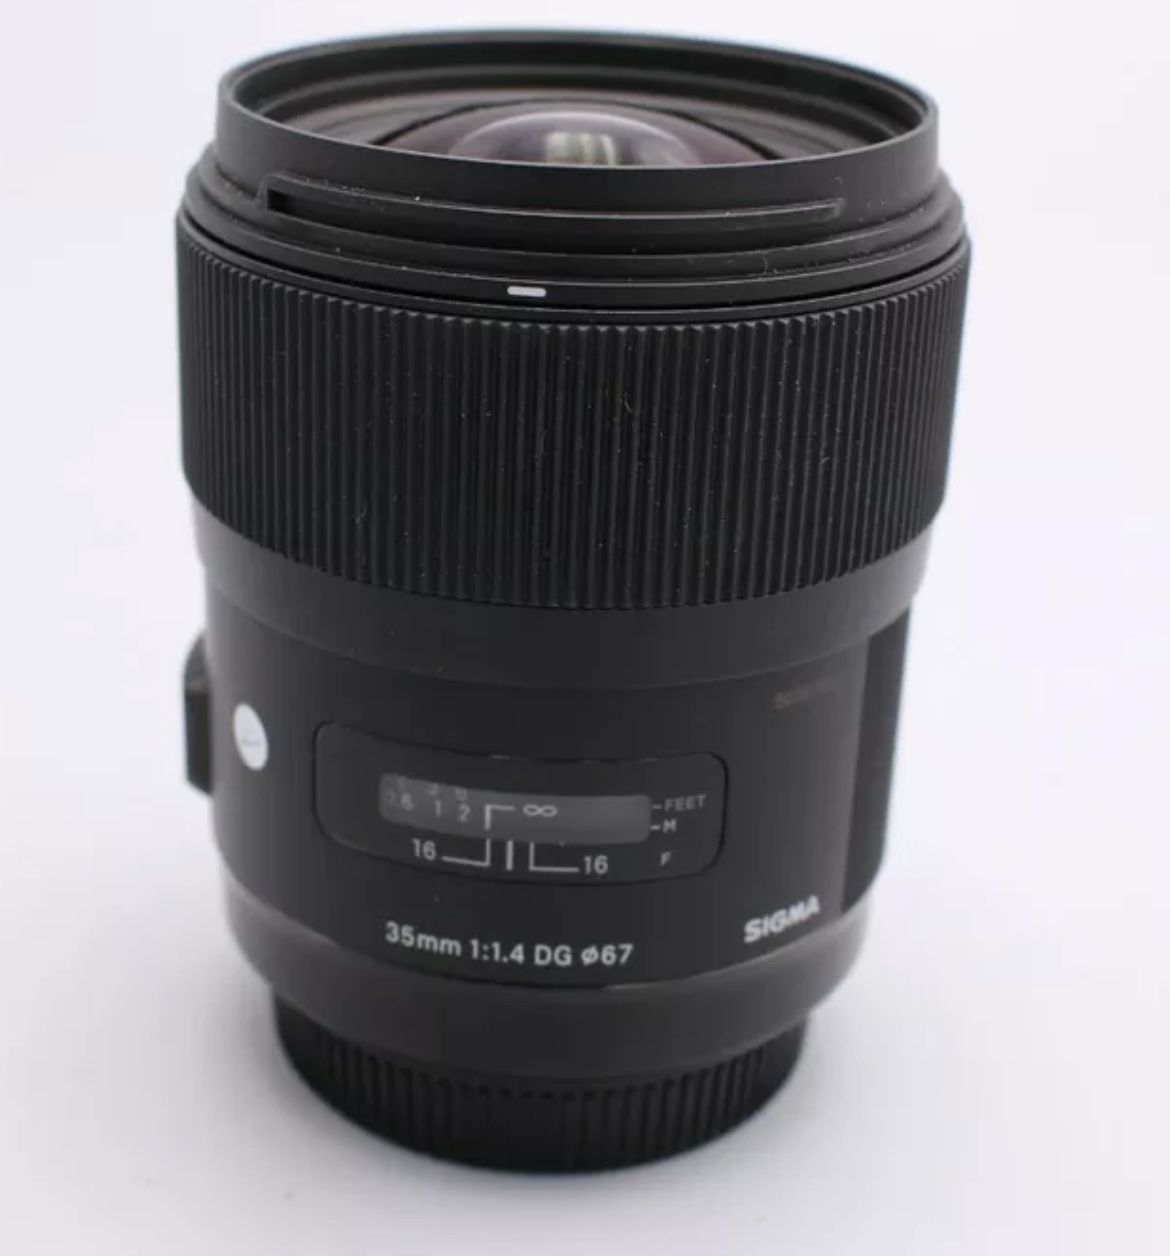 Sigma 35mm f/1.4 DG HSM A (Art) Lens, Dedicated Only for Sigma SA Mount (please note: not Sony Alpha Mount) {67}